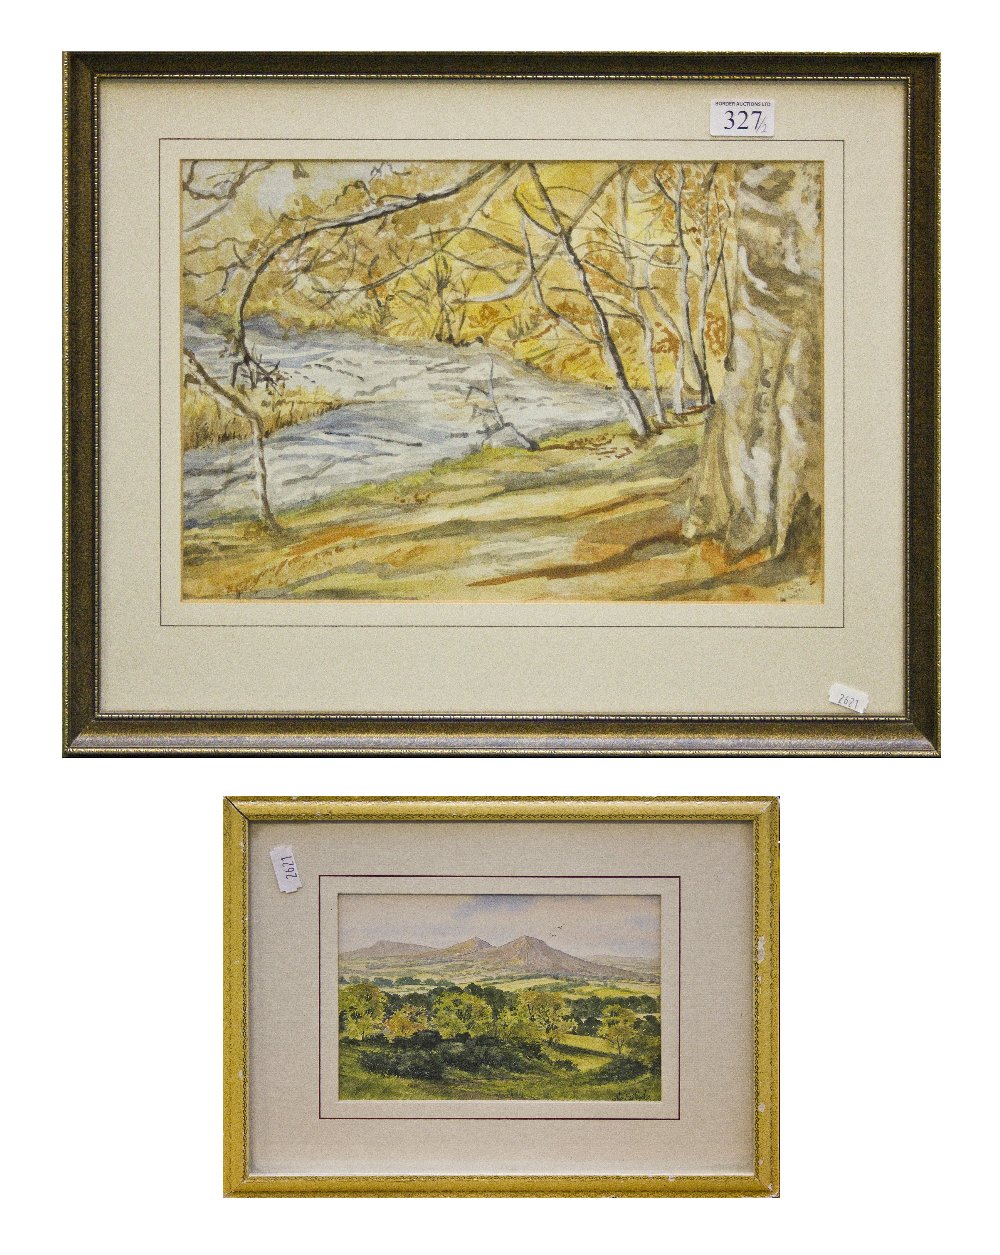 A framed watercolour of a river scene together with a small framed print of Eildon hills